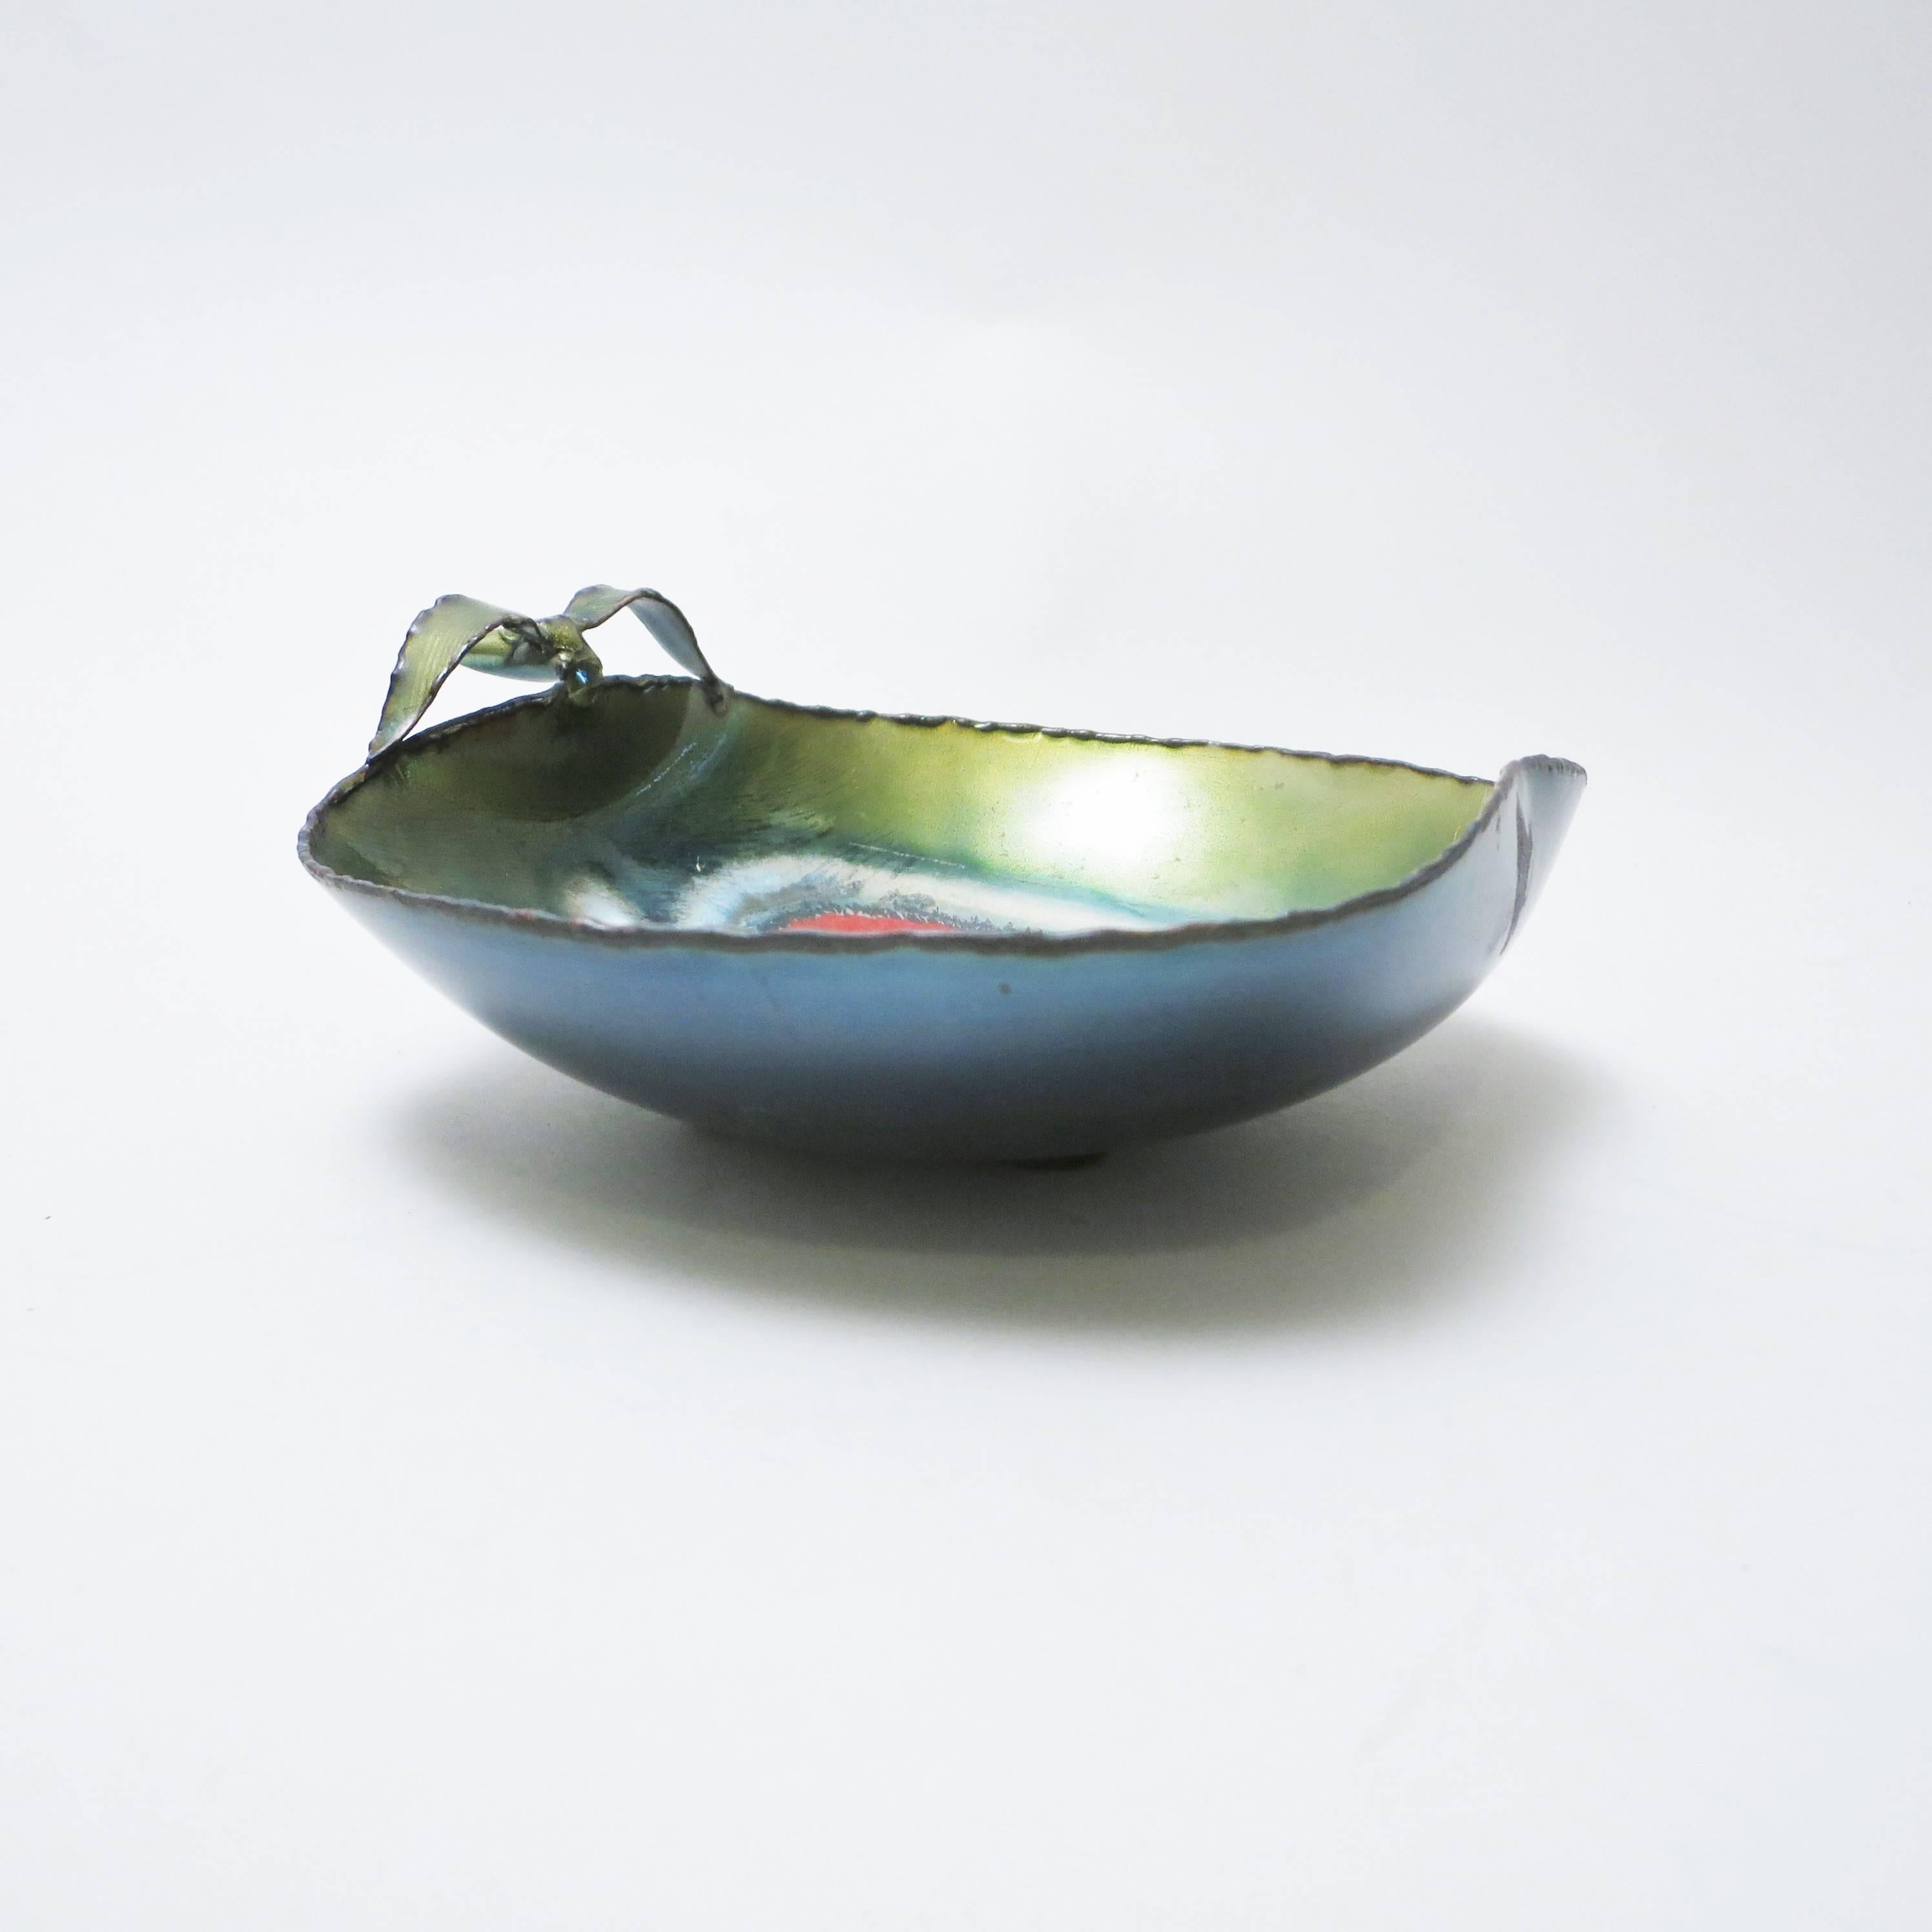 Italian Brutalist bowl in the shape of a apple in enamelled copper by Franco Bastianelli for Laurana in the 1960. 

Beautiful colors green, blue white and red.